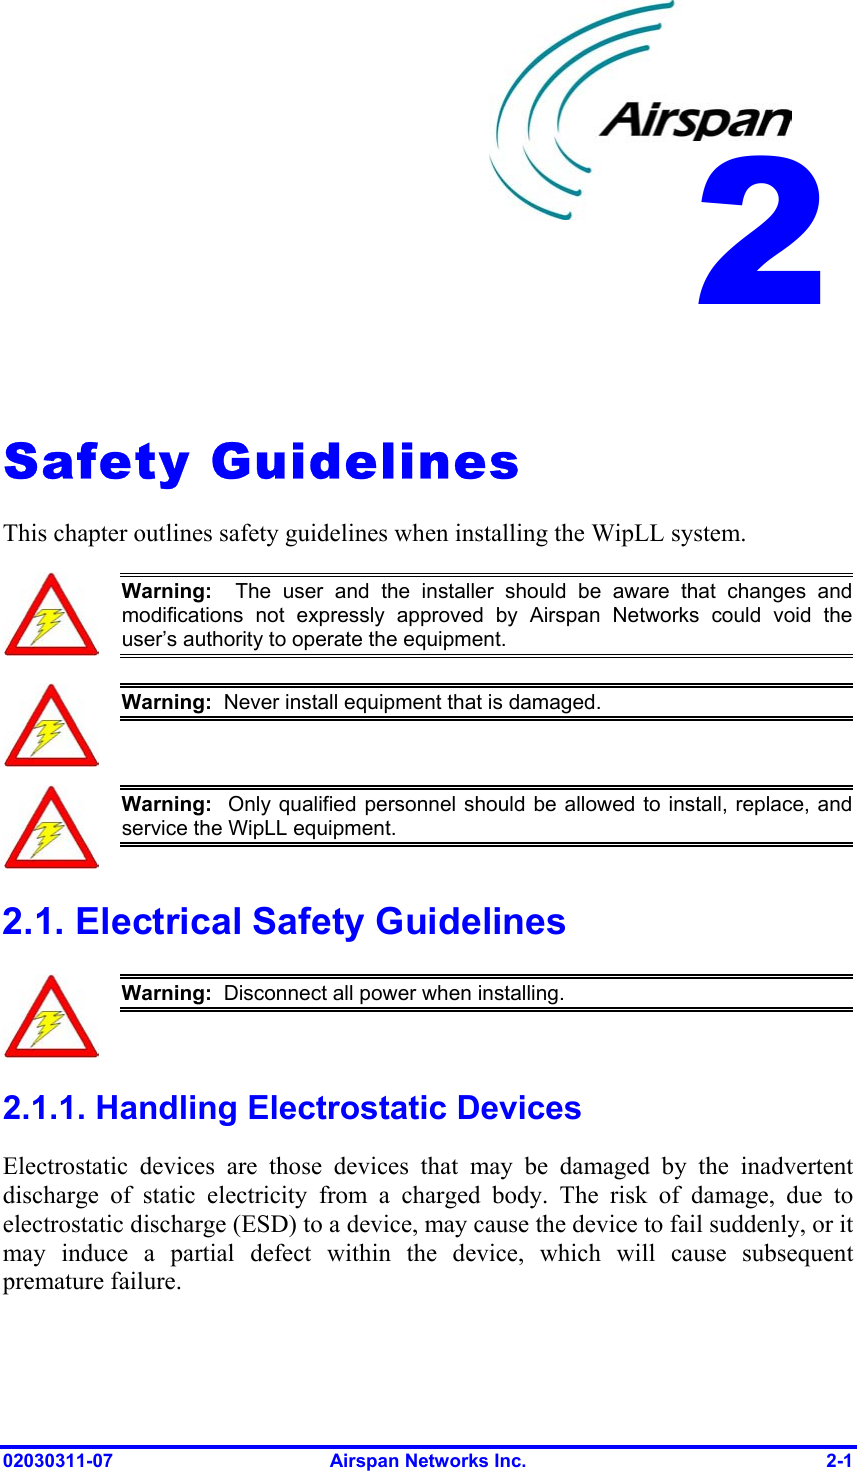 2    Safety Guidelines This chapter outlines safety guidelines when installing the WipLL system.  Warning:  The user and the installer should be aware that changes andmodifications not expressly approved by Airspan Networks could void theuser’s authority to operate the equipment.  Warning:  Never install equipment that is damaged.  Warning:  Only qualified personnel should be allowed to install, replace, andservice the WipLL equipment. 2.1. Electrical Safety Guidelines  Warning:  Disconnect all power when installing. 2.1.1. Handling Electrostatic Devices Electrostatic devices are those devices that may be damaged by the inadvertent discharge of static electricity from a charged body. The risk of damage, due to electrostatic discharge (ESD) to a device, may cause the device to fail suddenly, or it may induce a partial defect within the device, which will cause subsequent premature failure. 02030311-07  Airspan Networks Inc.  2-1 